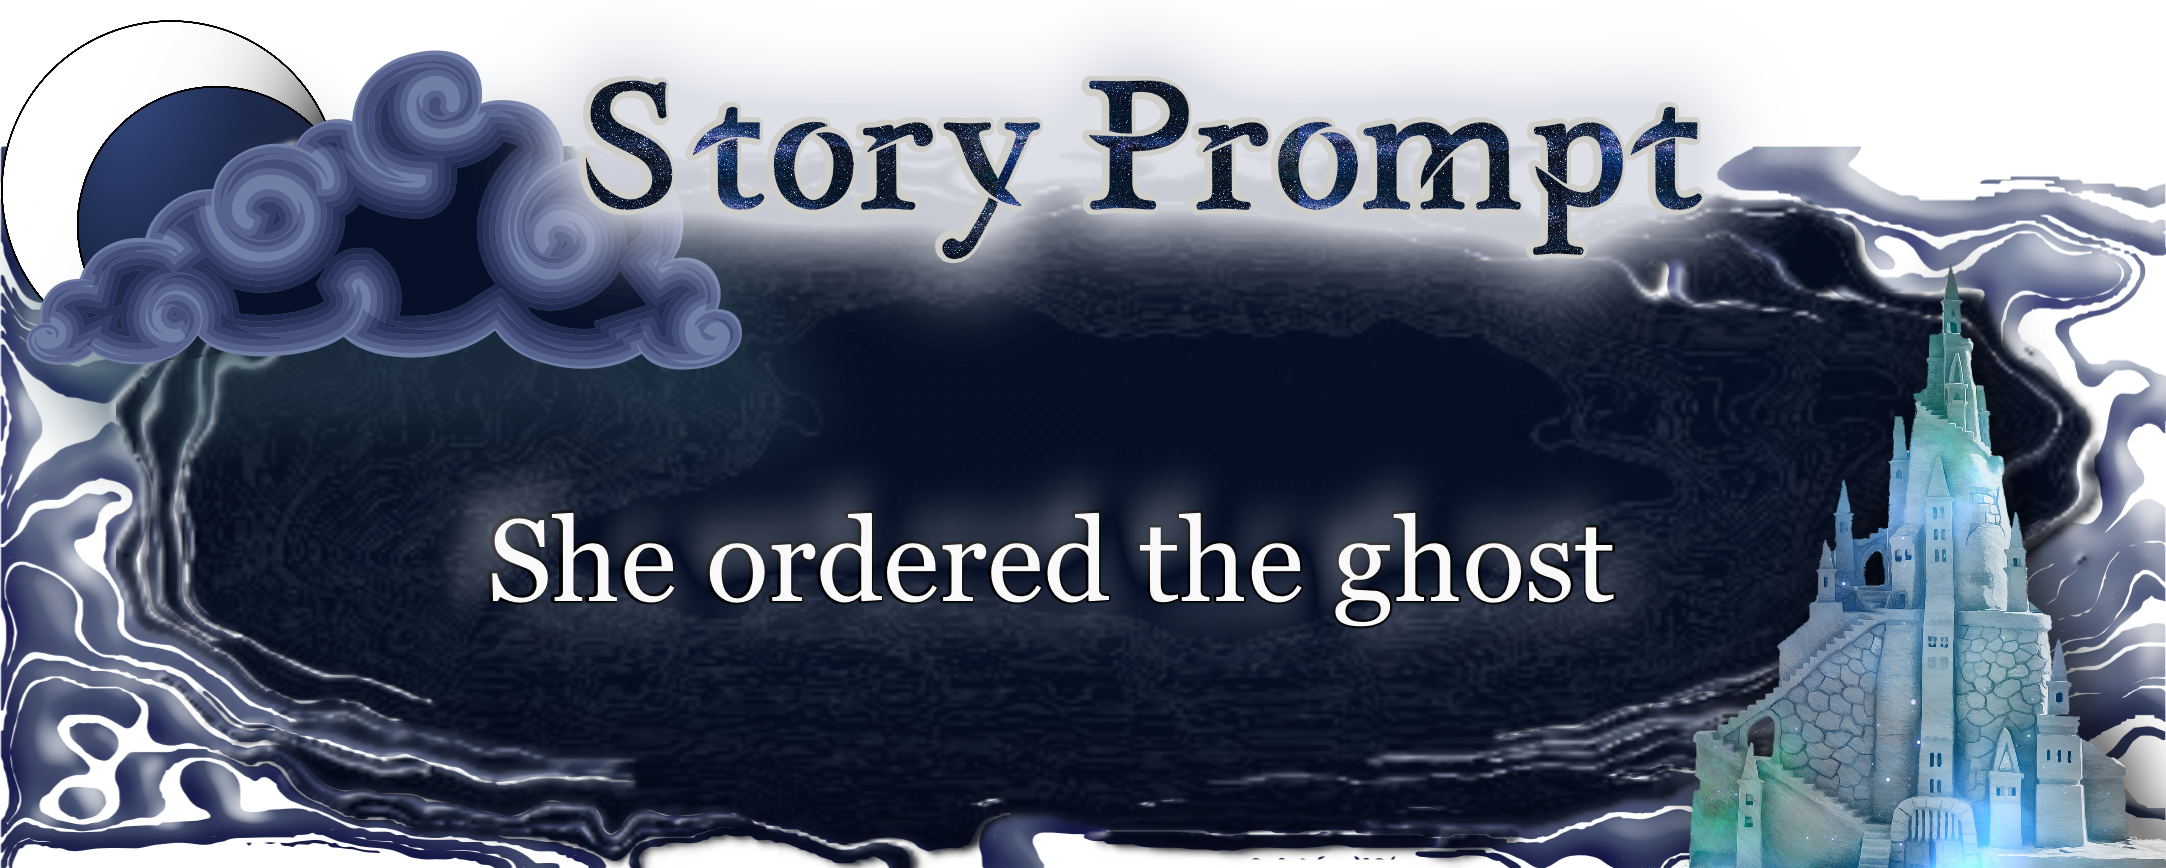 Author Jenna Eatough's Flash Fiction Story from writing prompt: She ordered the ghosts